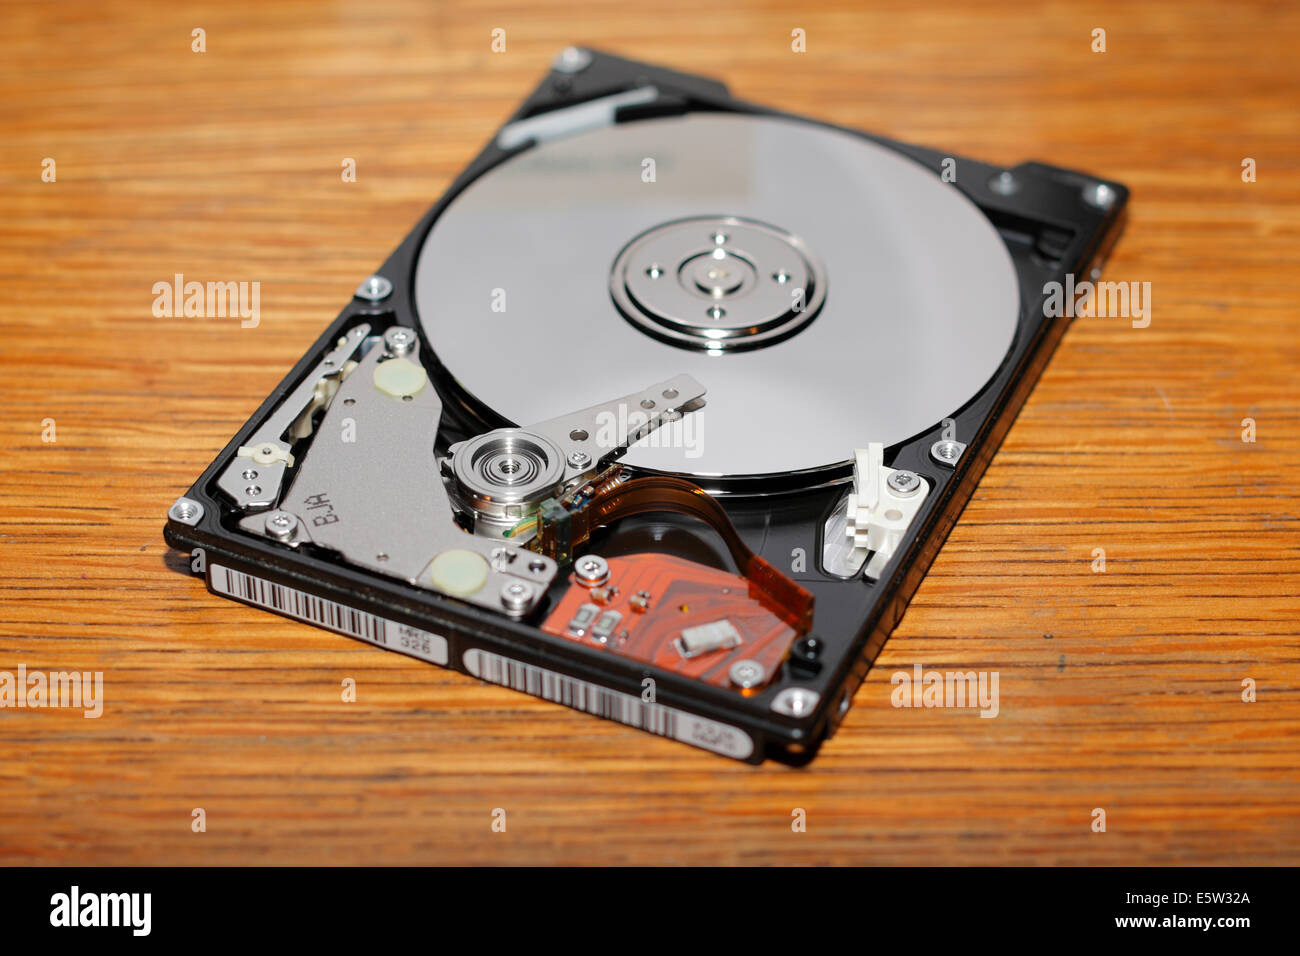 Opened hard drive showing disc platter. Stock Photo